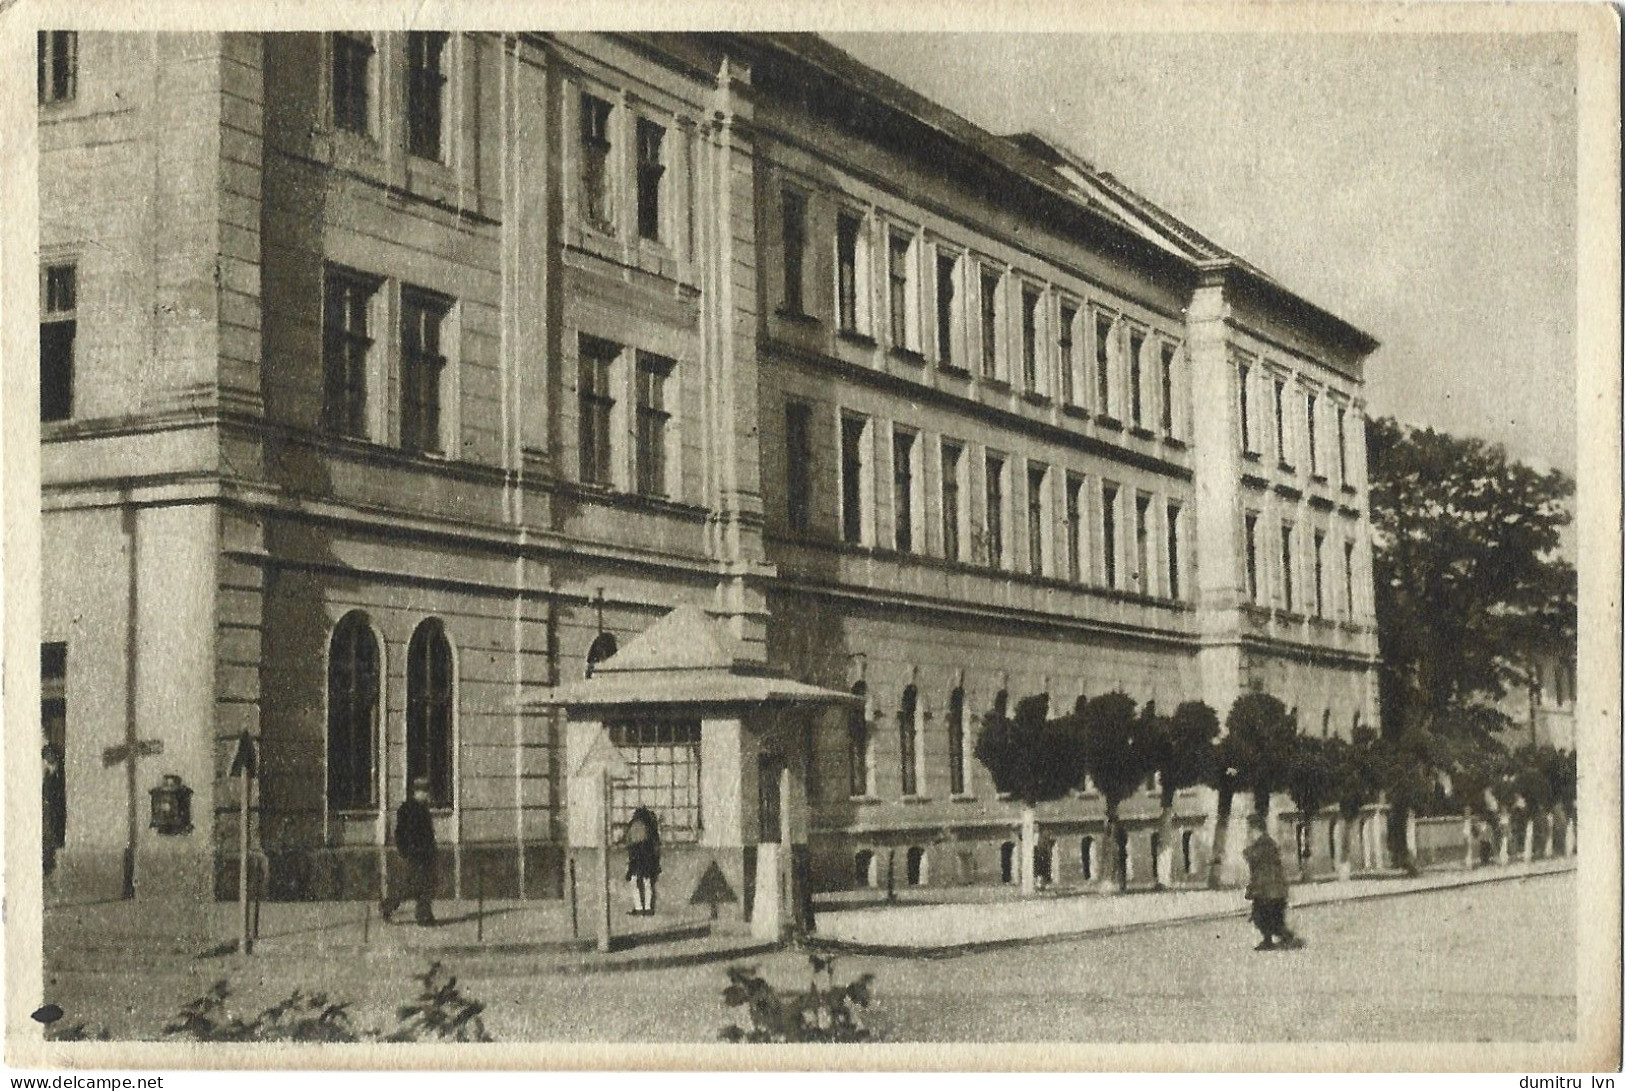 ROMANIA SFANTU GHEORGHE - THE HUNGARIAN HIGH SCHOOL BUILDING, ARCHITECTURE, PEOPLE POSTAGE DUE - Postage Due